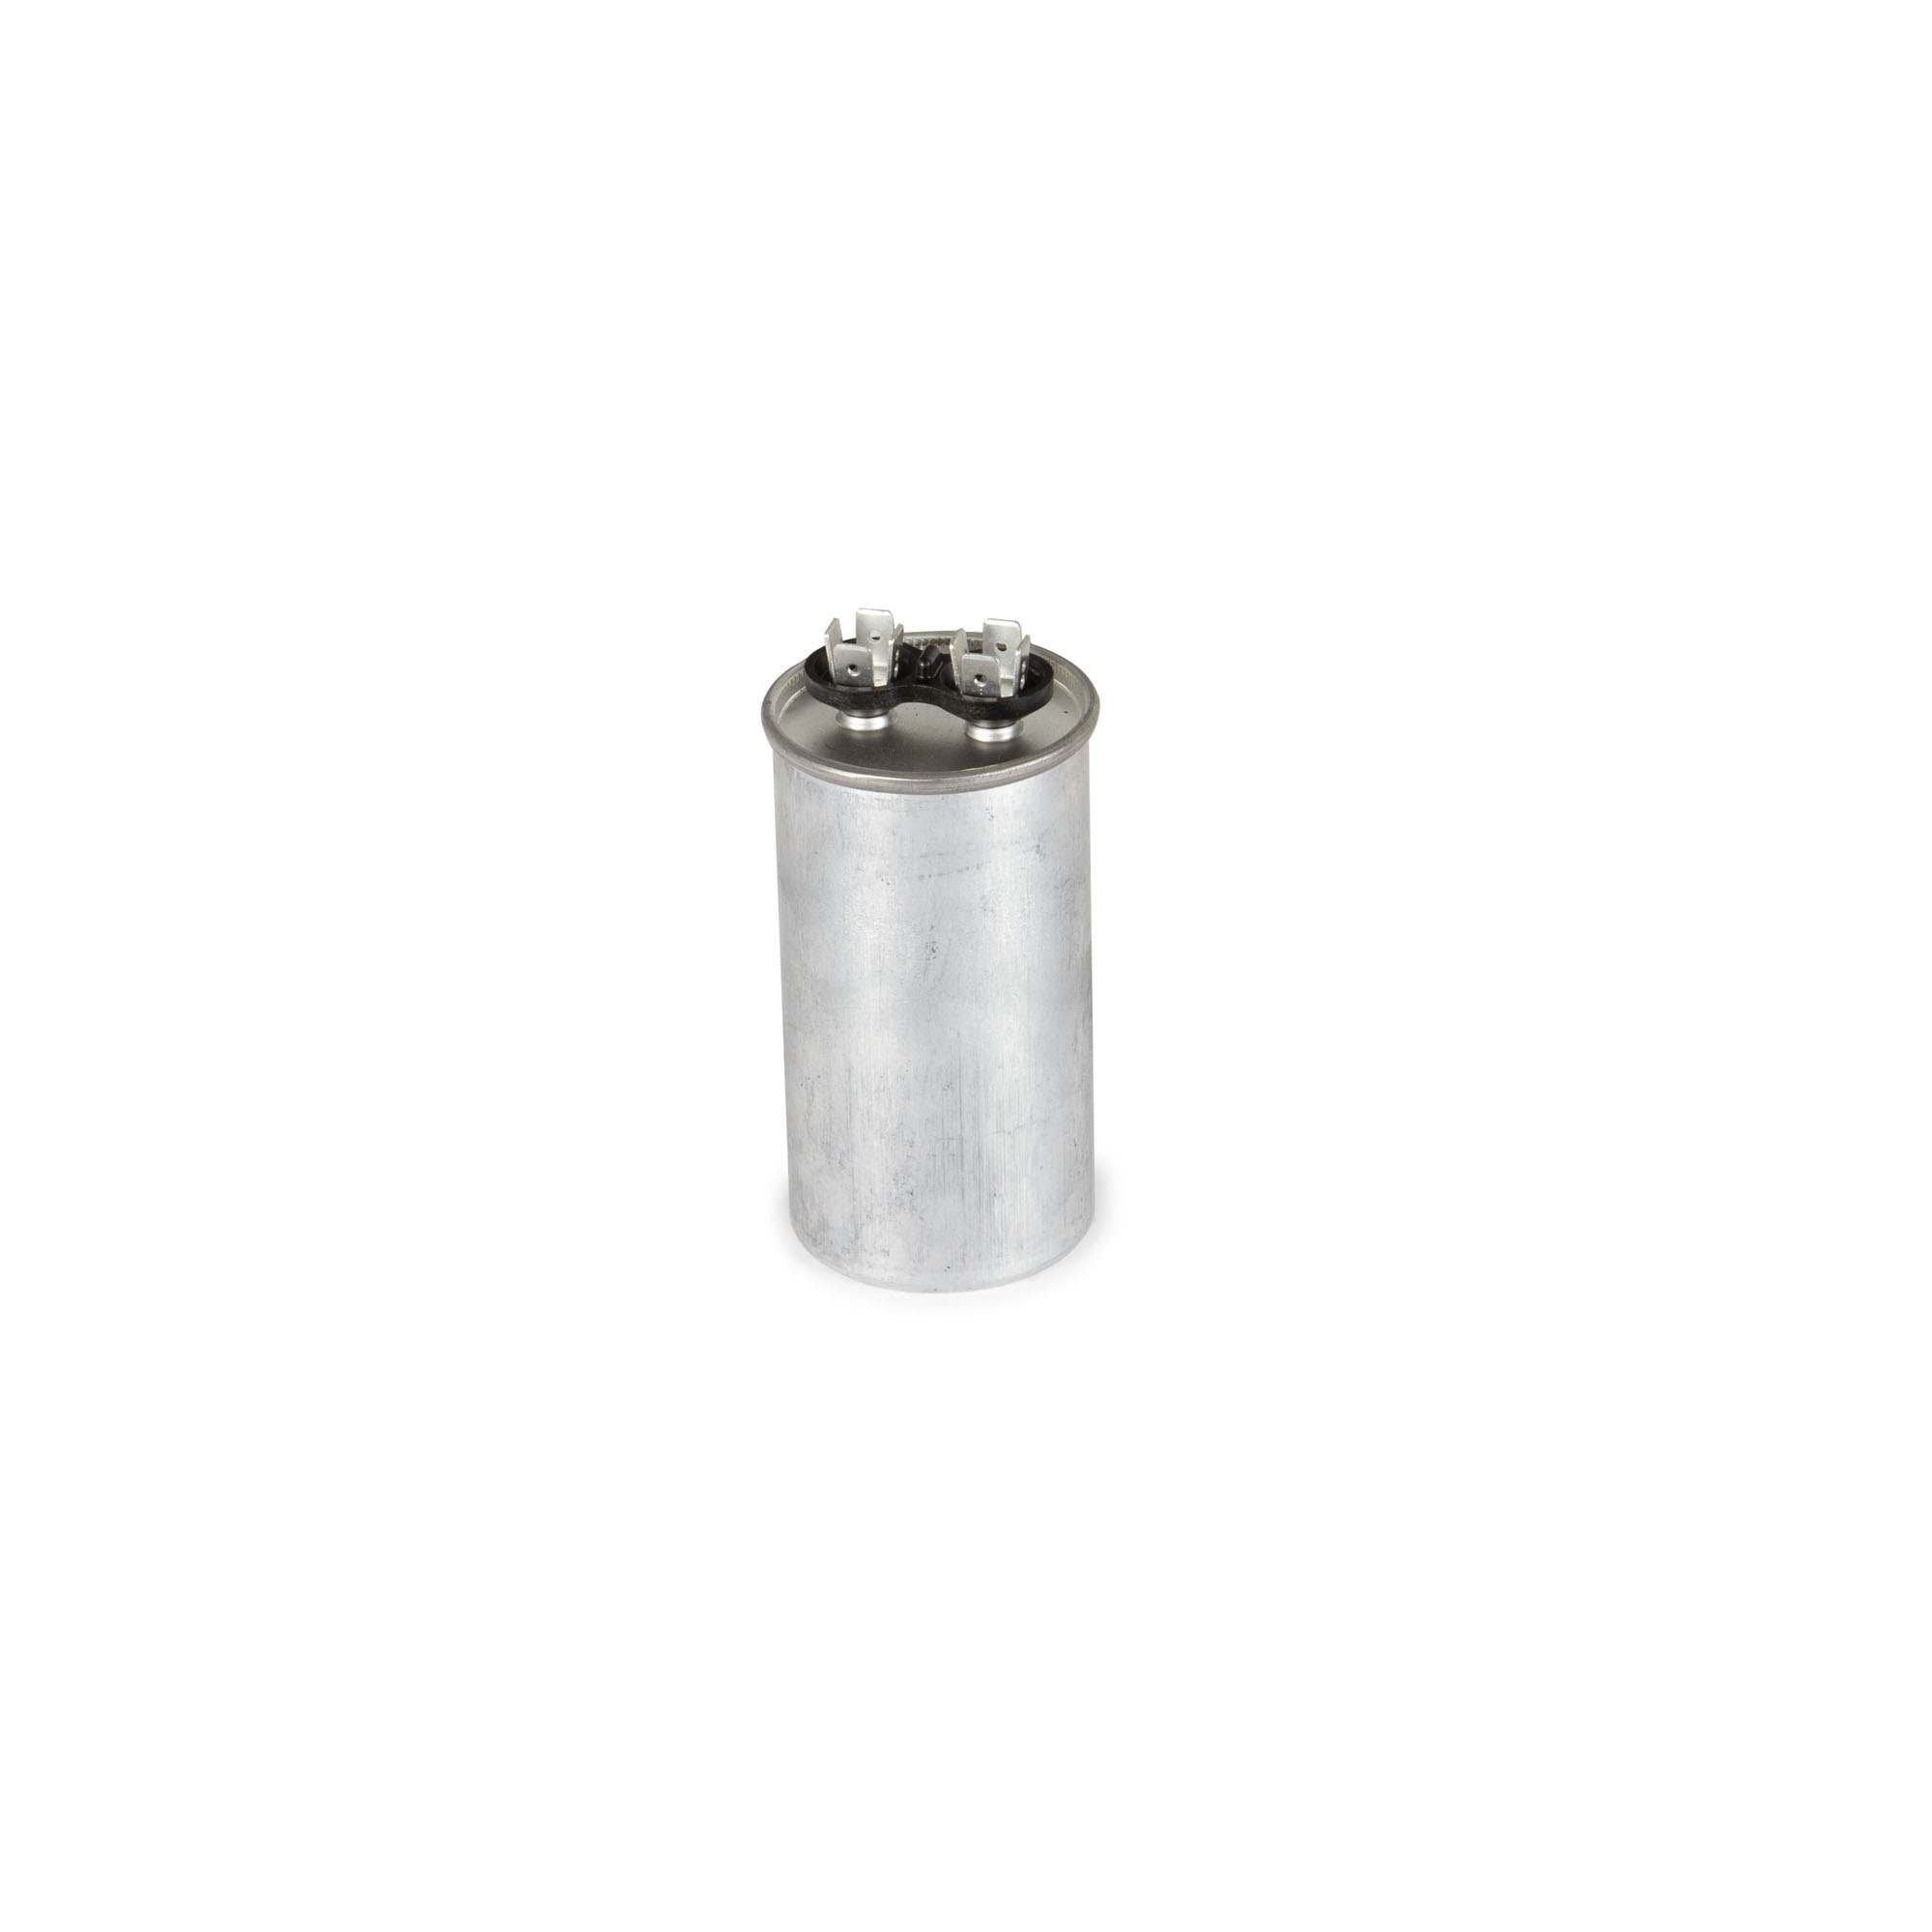 TPD 72R6 Capacitor